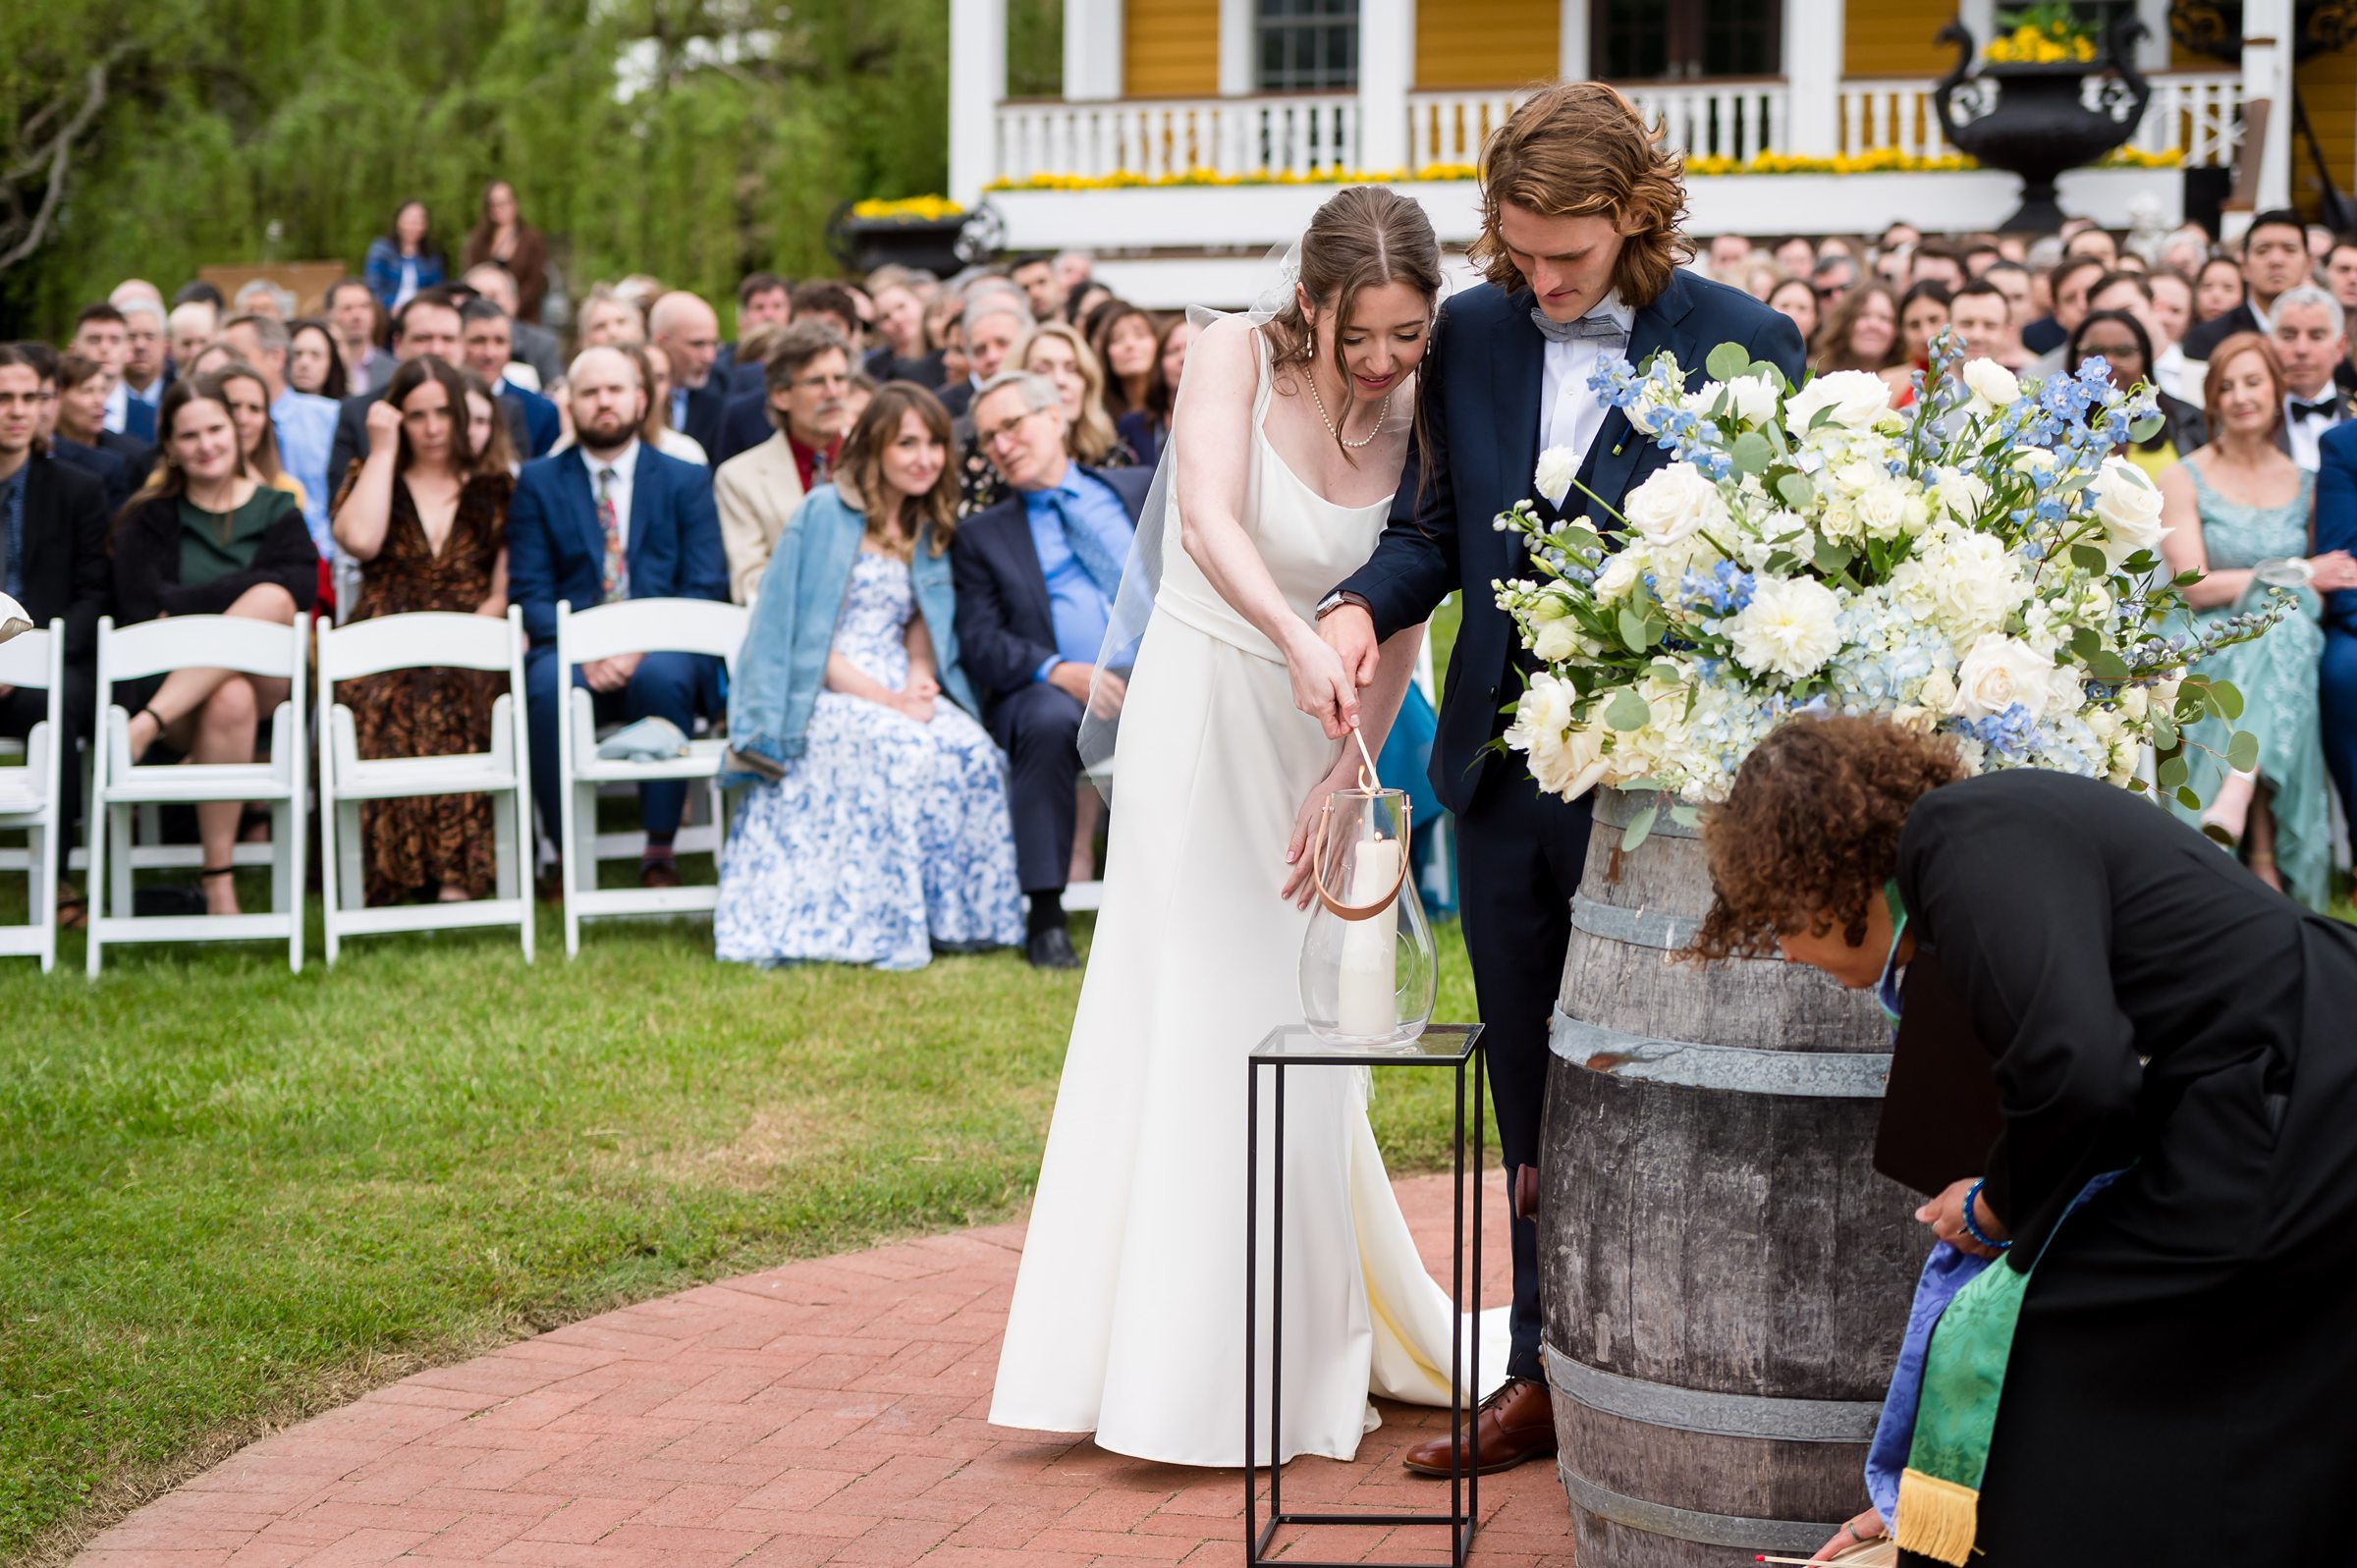 A bride and groom pour liquid into a vase during an outdoor wedding ceremony. Guests are seated in rows in the background, and a person is crouched near a barrel to the right.